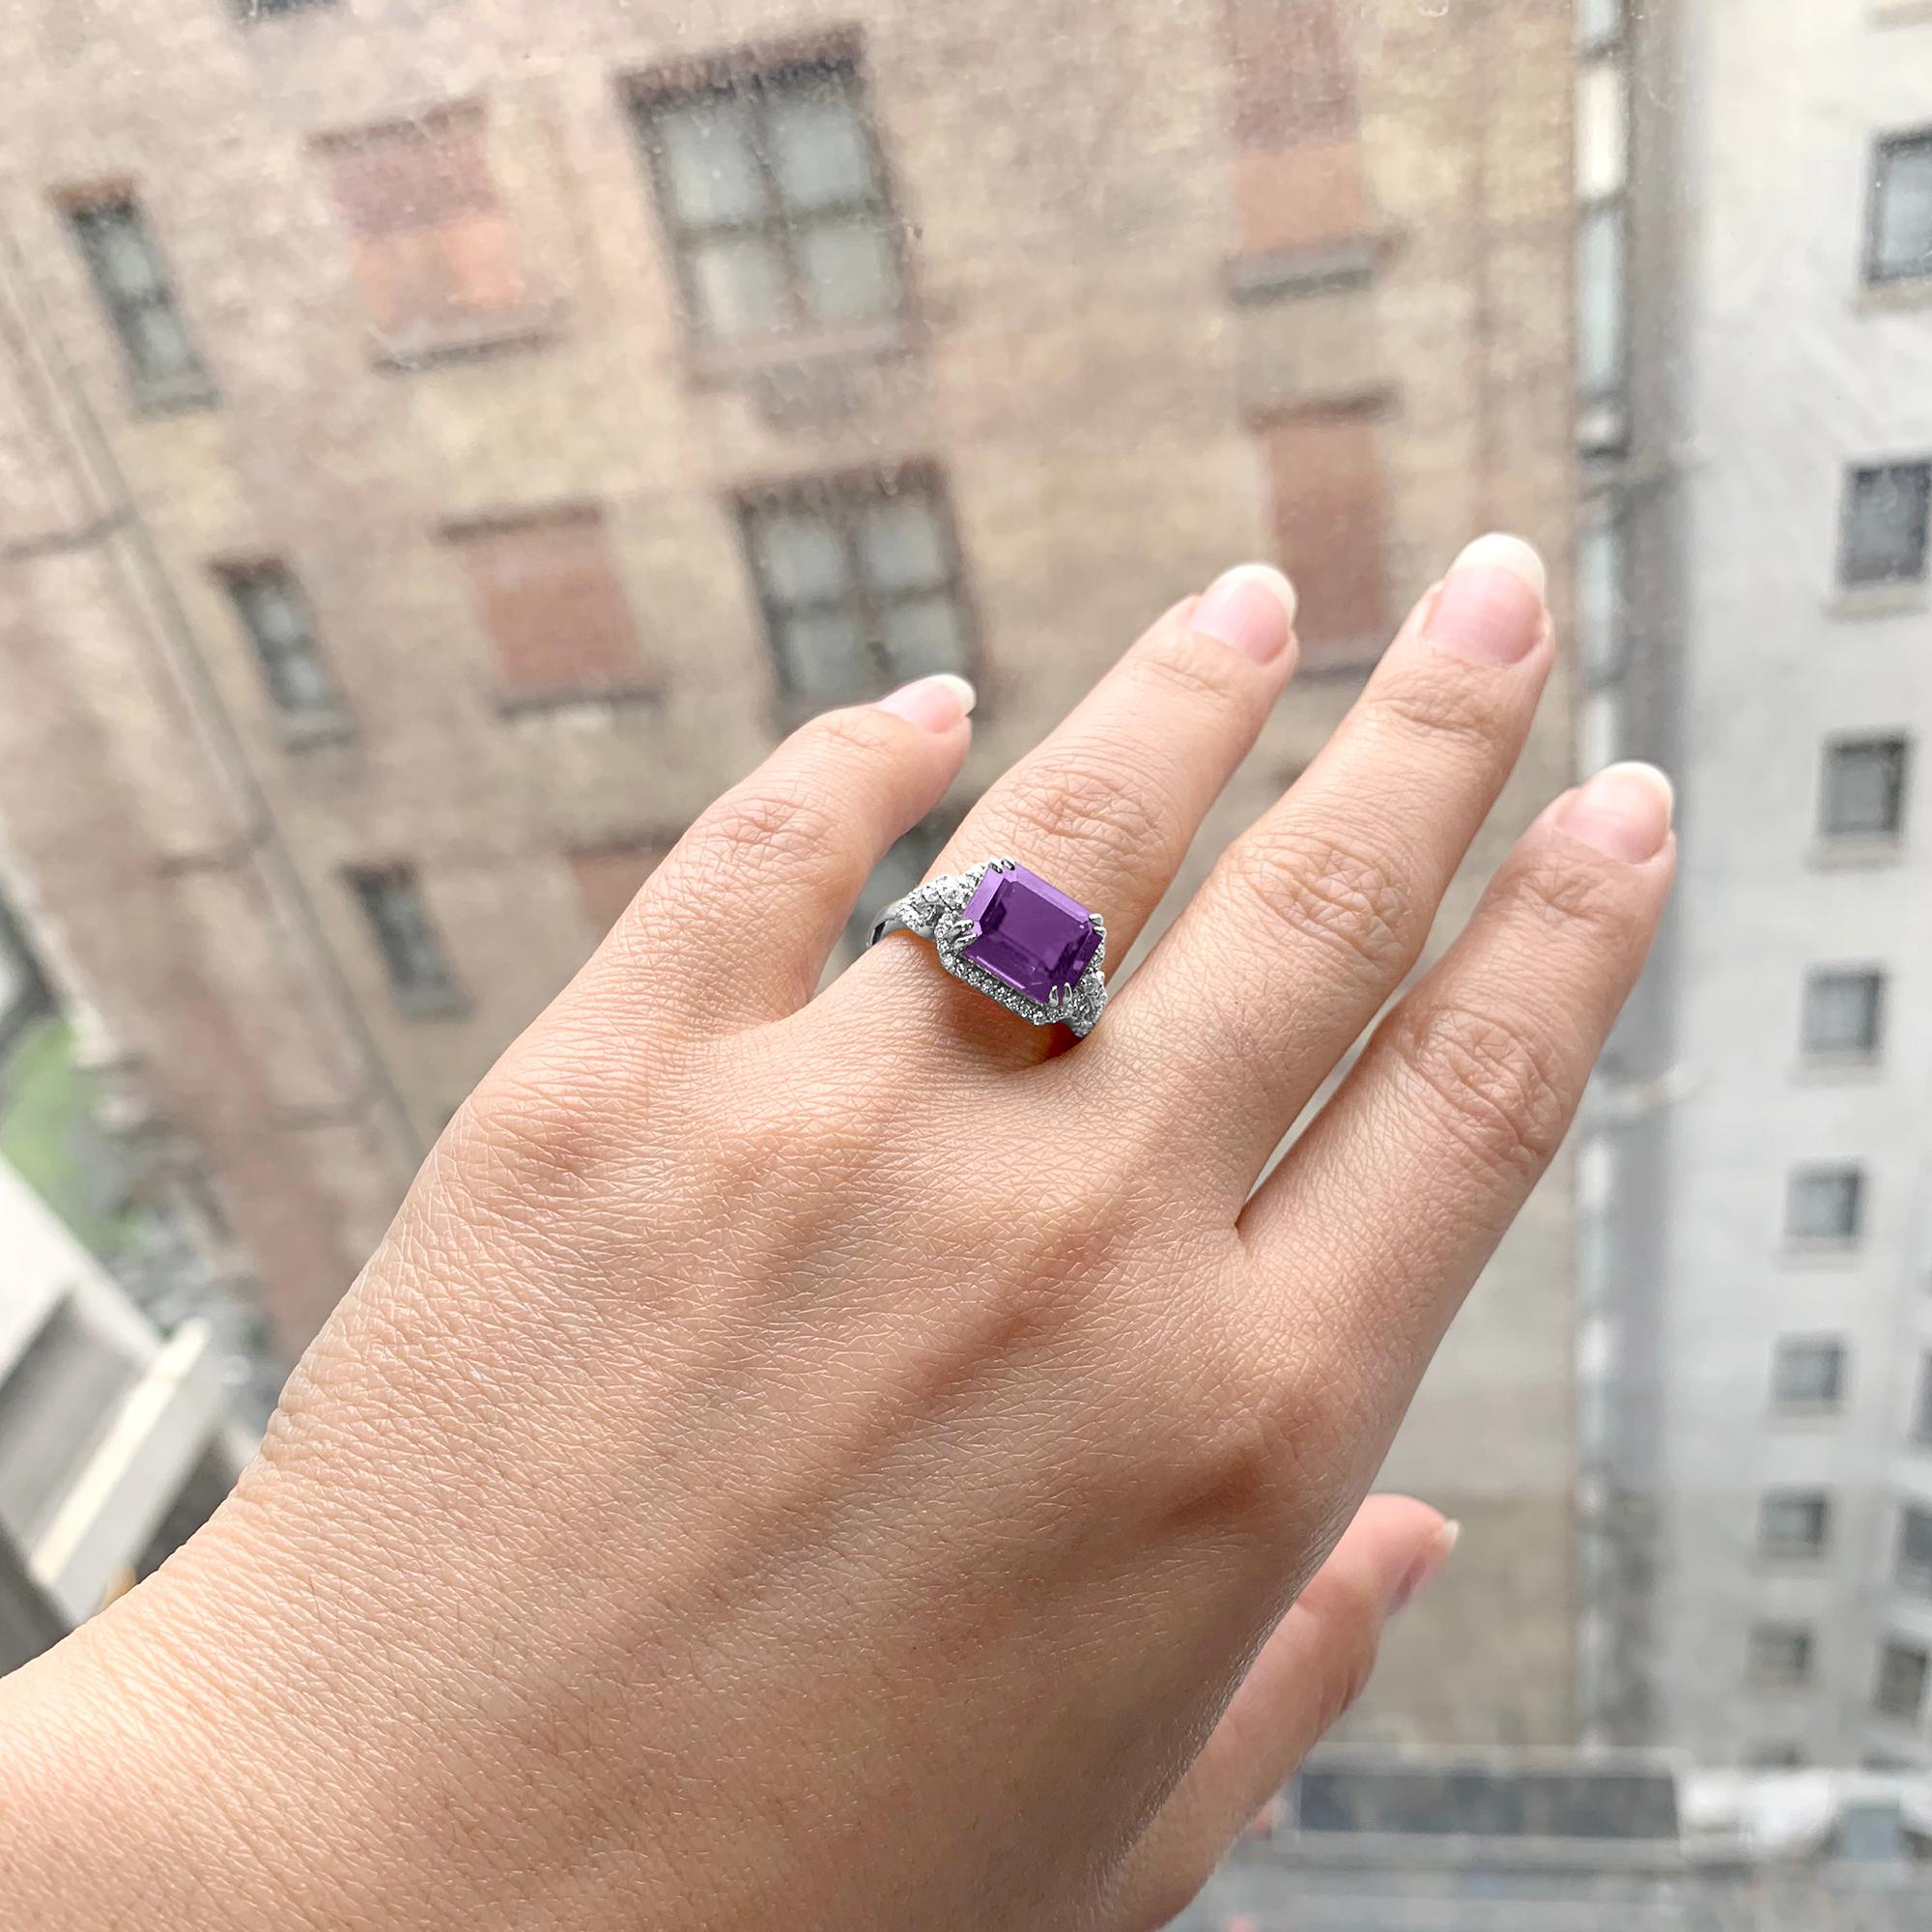 Amethyst Small East-West Emerald Cut Ring in 18K White Gold with Diamonds, from 'Gossip' Collection. Please allow 2-4 weeks for this item to be delivered.

Stone Size: 8 x 10 mm 

Diamonds: G-H / VS, Approx Wt: 0.34 Cts